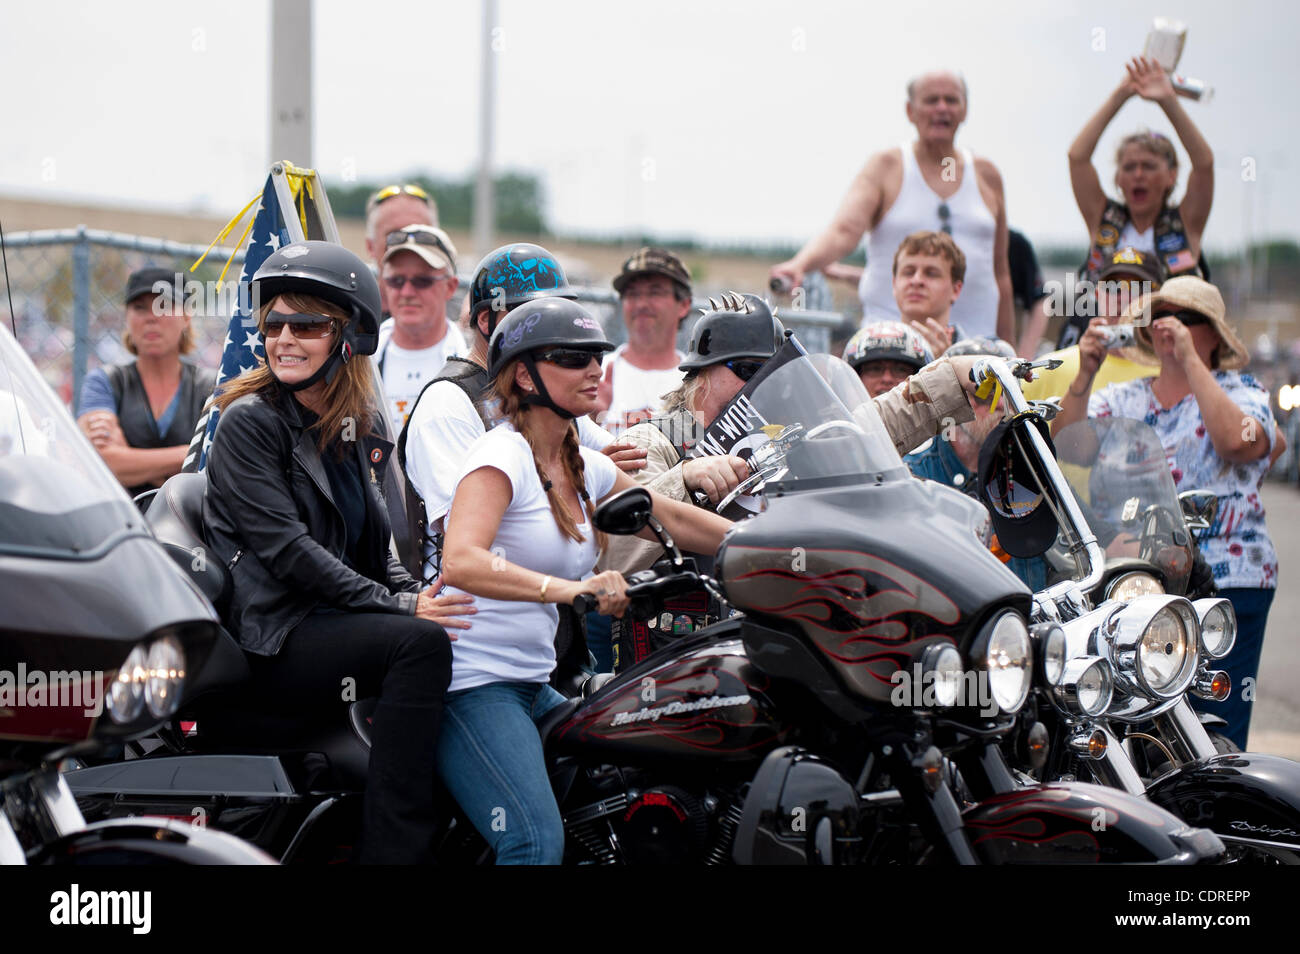 May 29, 2011 - Washington, District of Columbia, U.S. - WIth daughter PIPER PALIN driving, Former Alaska Governor SARAH PALIN rides with Rolling Thunder during the annual Memorial Day rememberance ride in Washington, D.C. on Sunday. (Credit Image: © Pete Marovich/ZUMAPRESS.com) Stock Photo